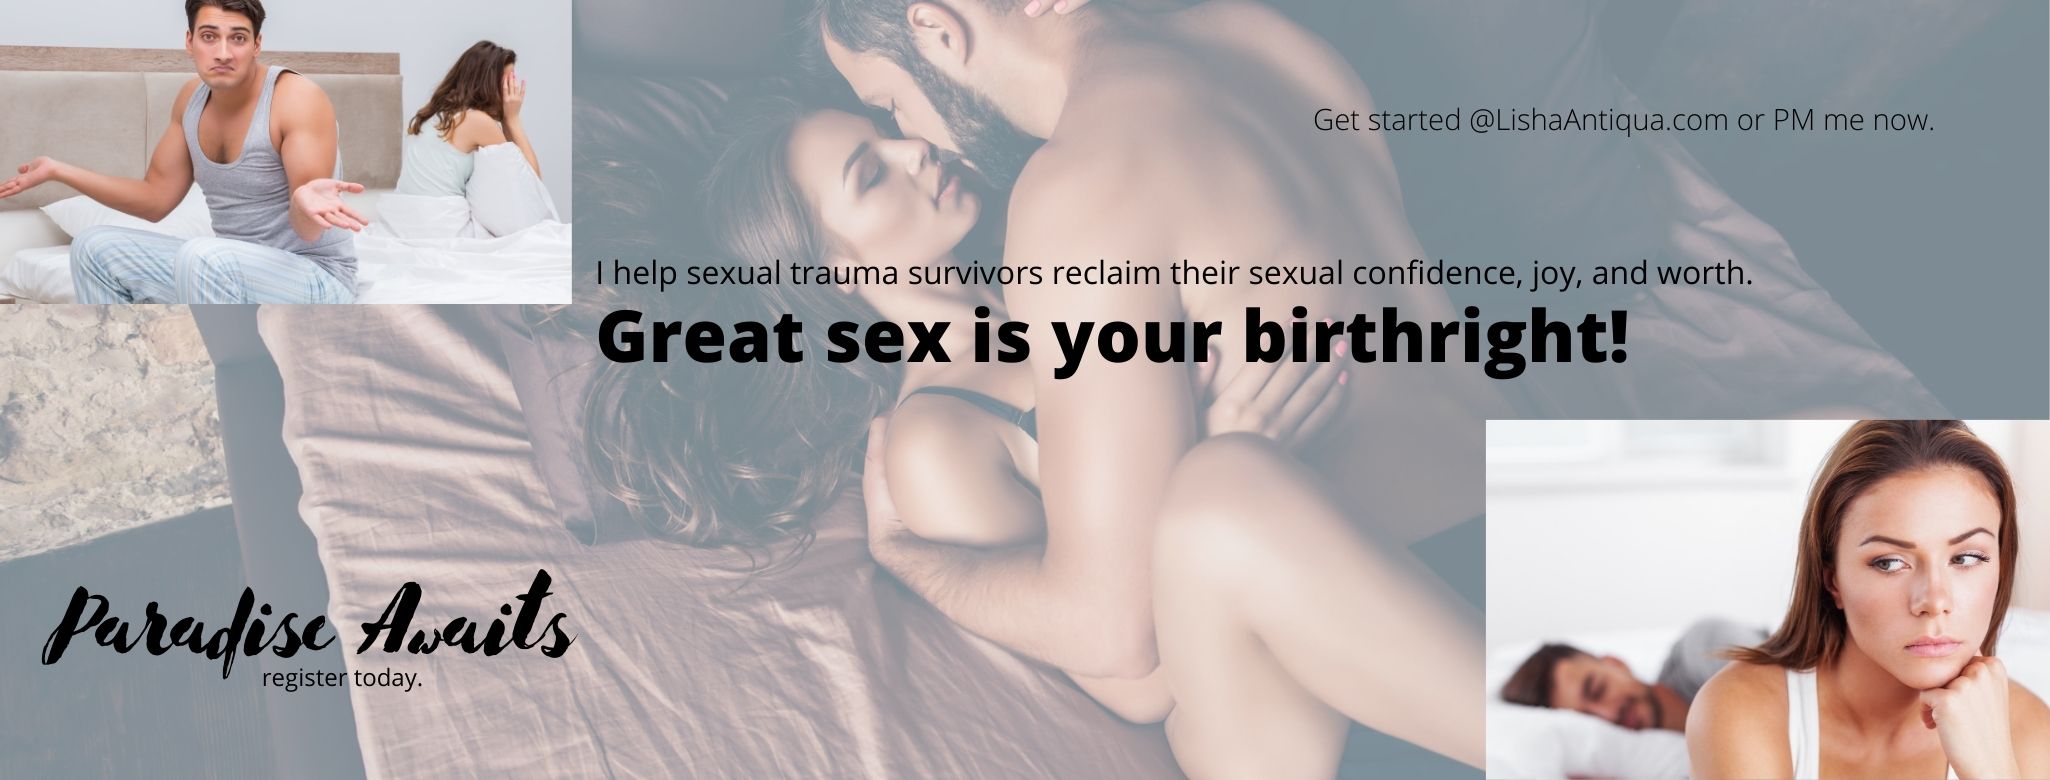 Great sex is your birthright 1